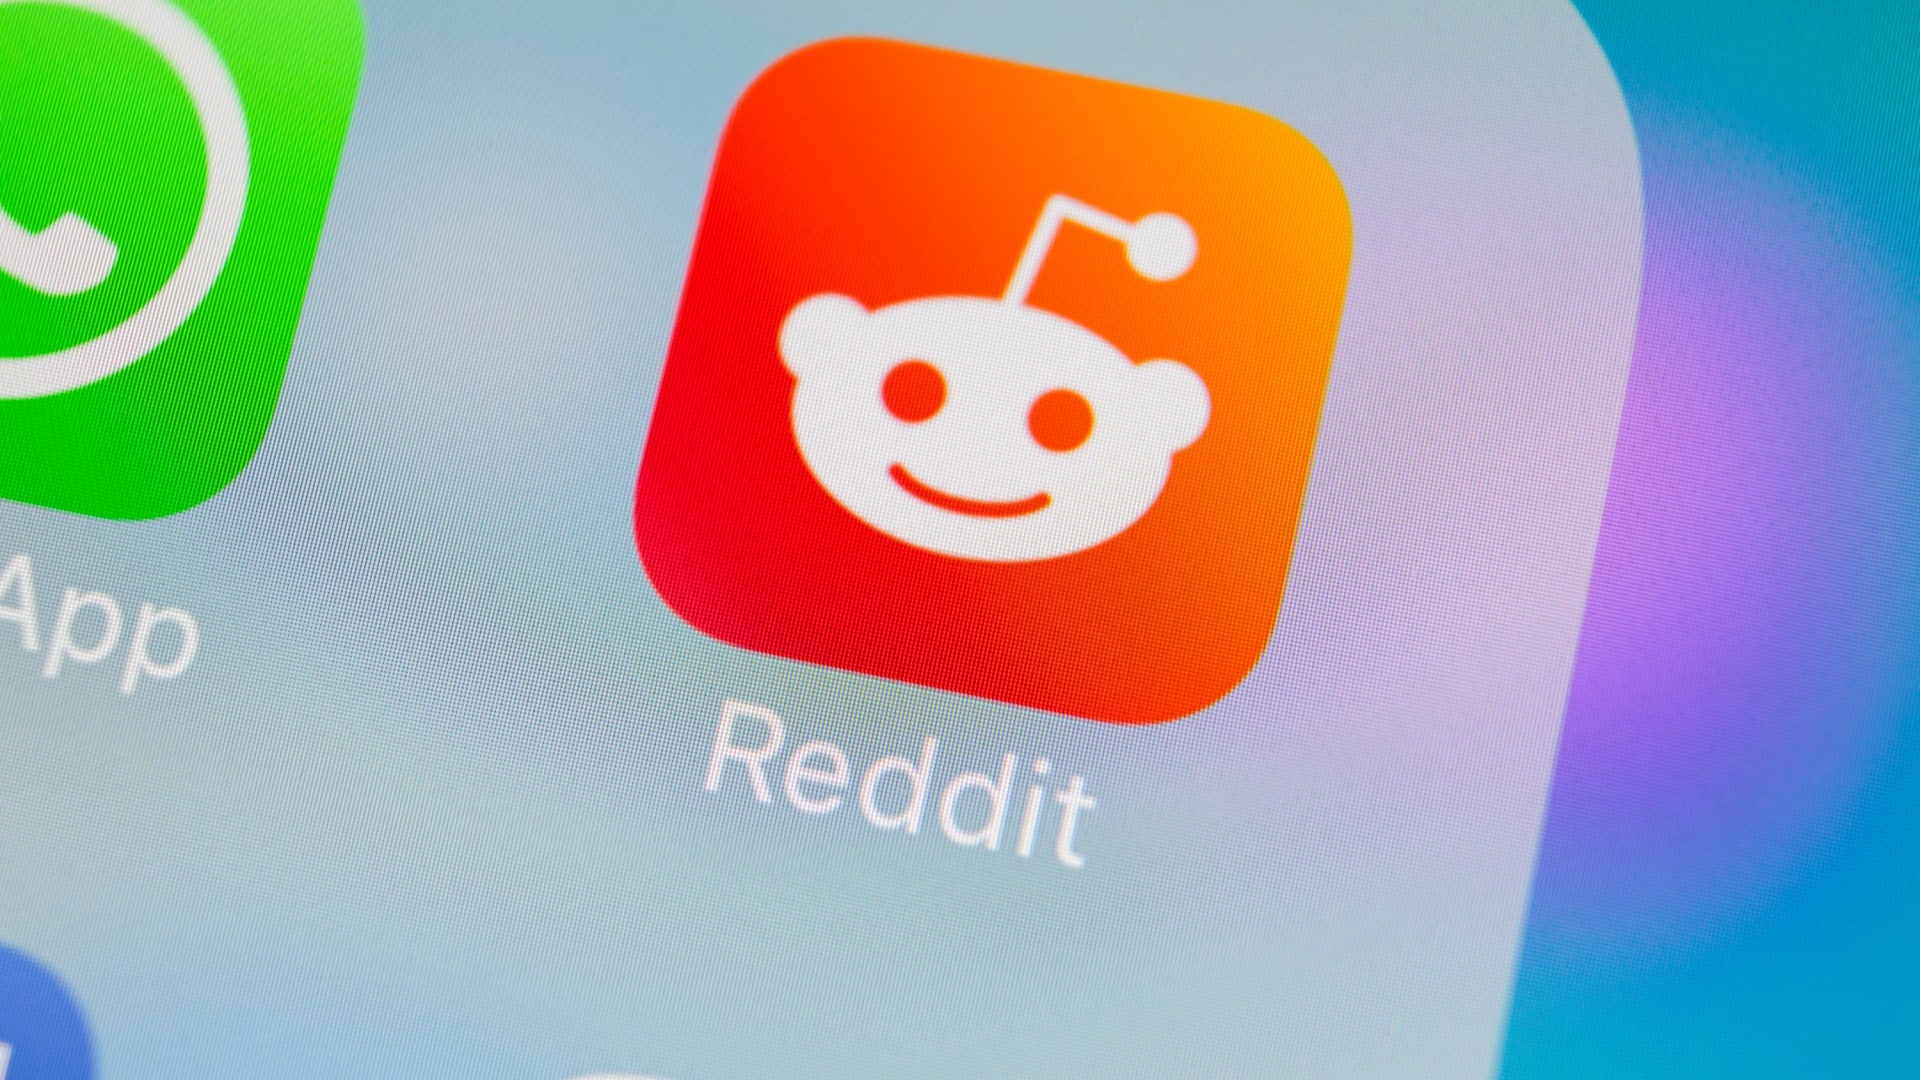 Reddit is updating its gender identity and ads policies